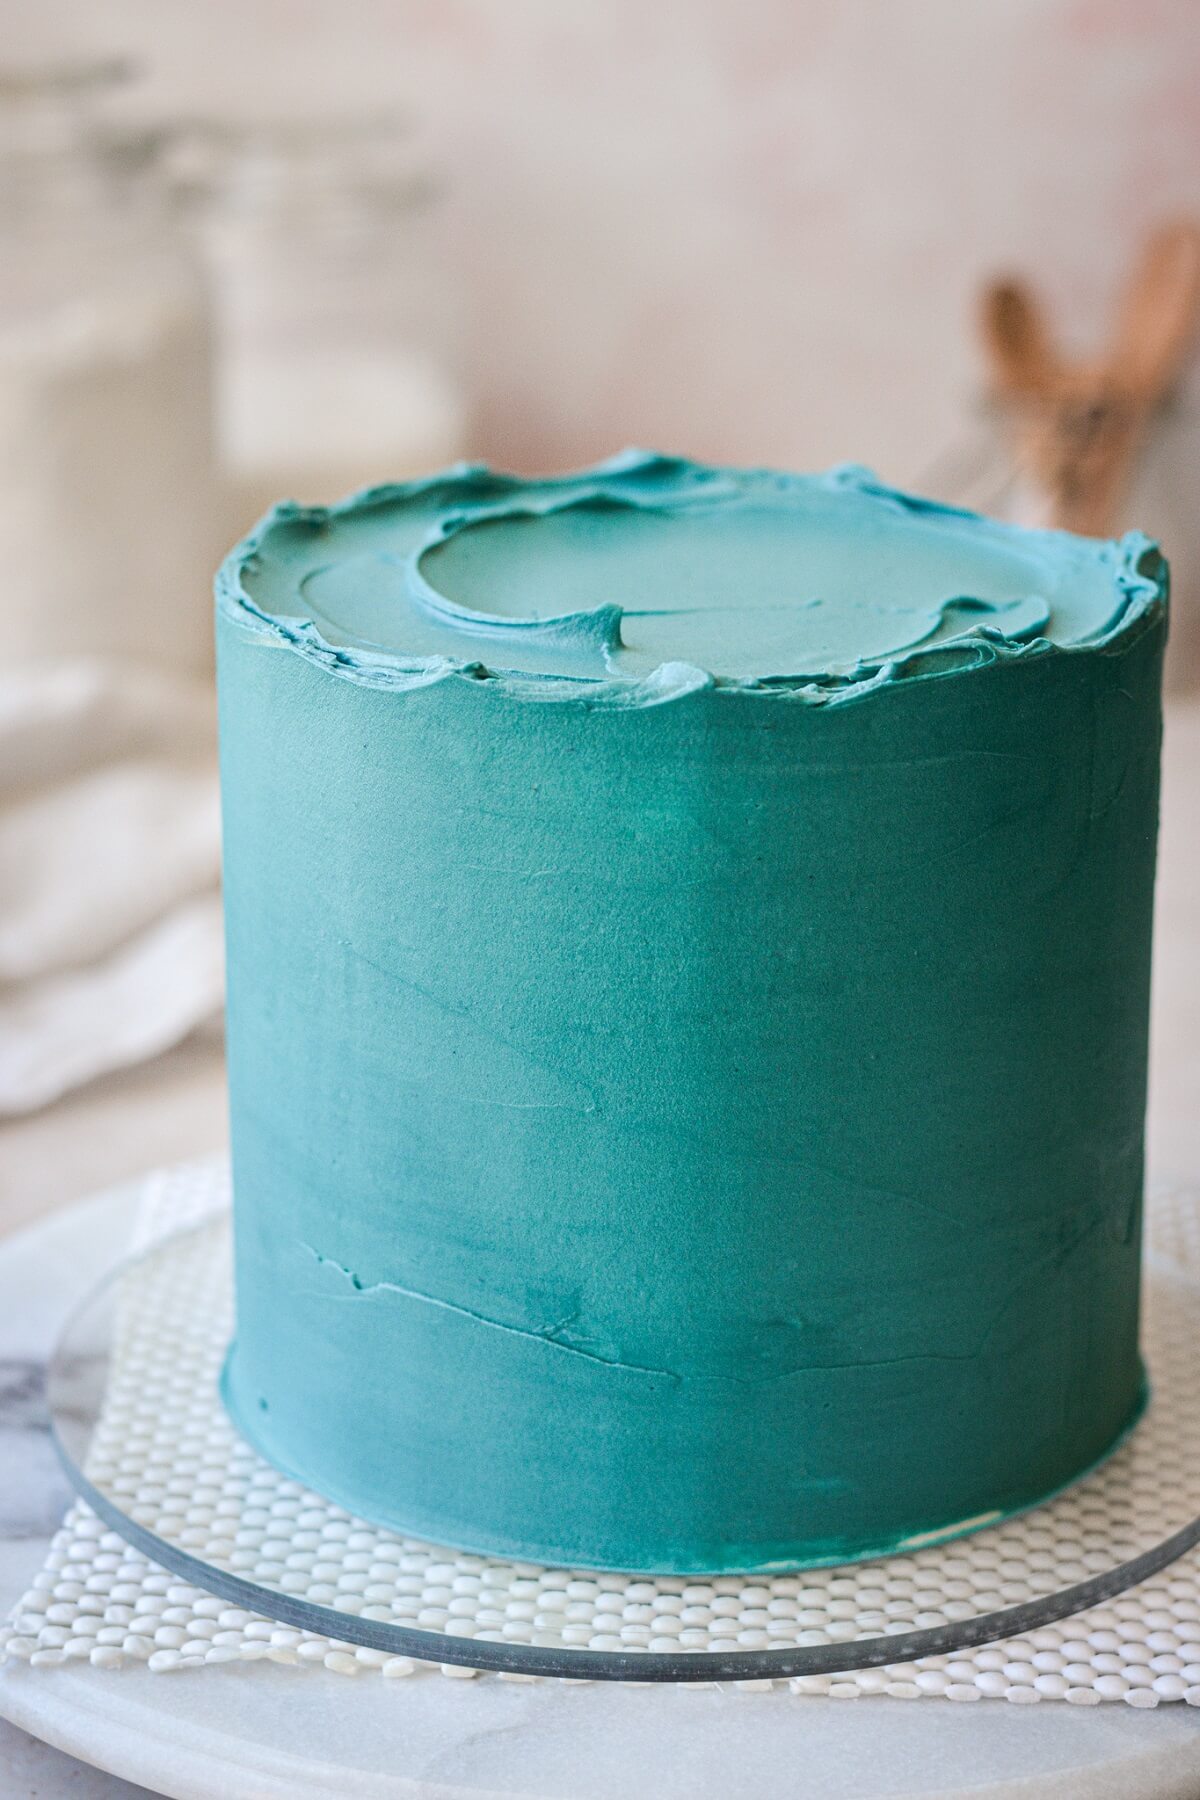 Cake frosted with deep turquoise blue buttercream.